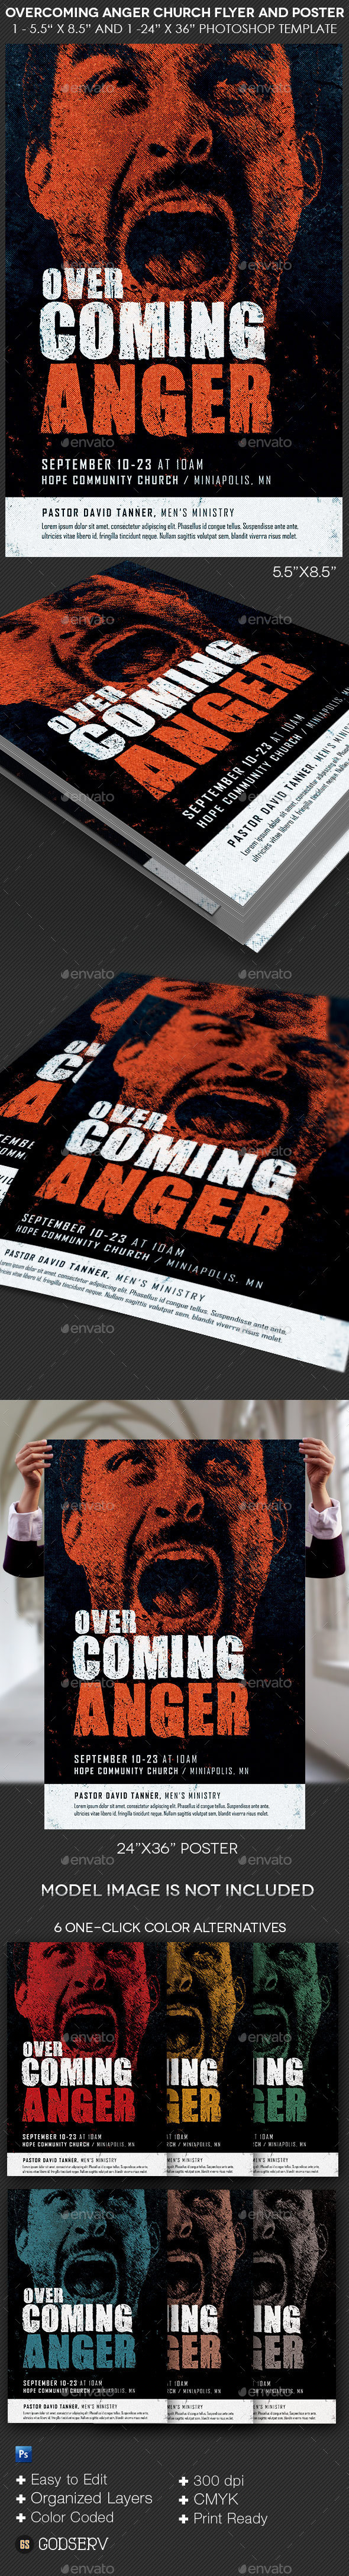 Overcoming anger church flyer and poster template preview